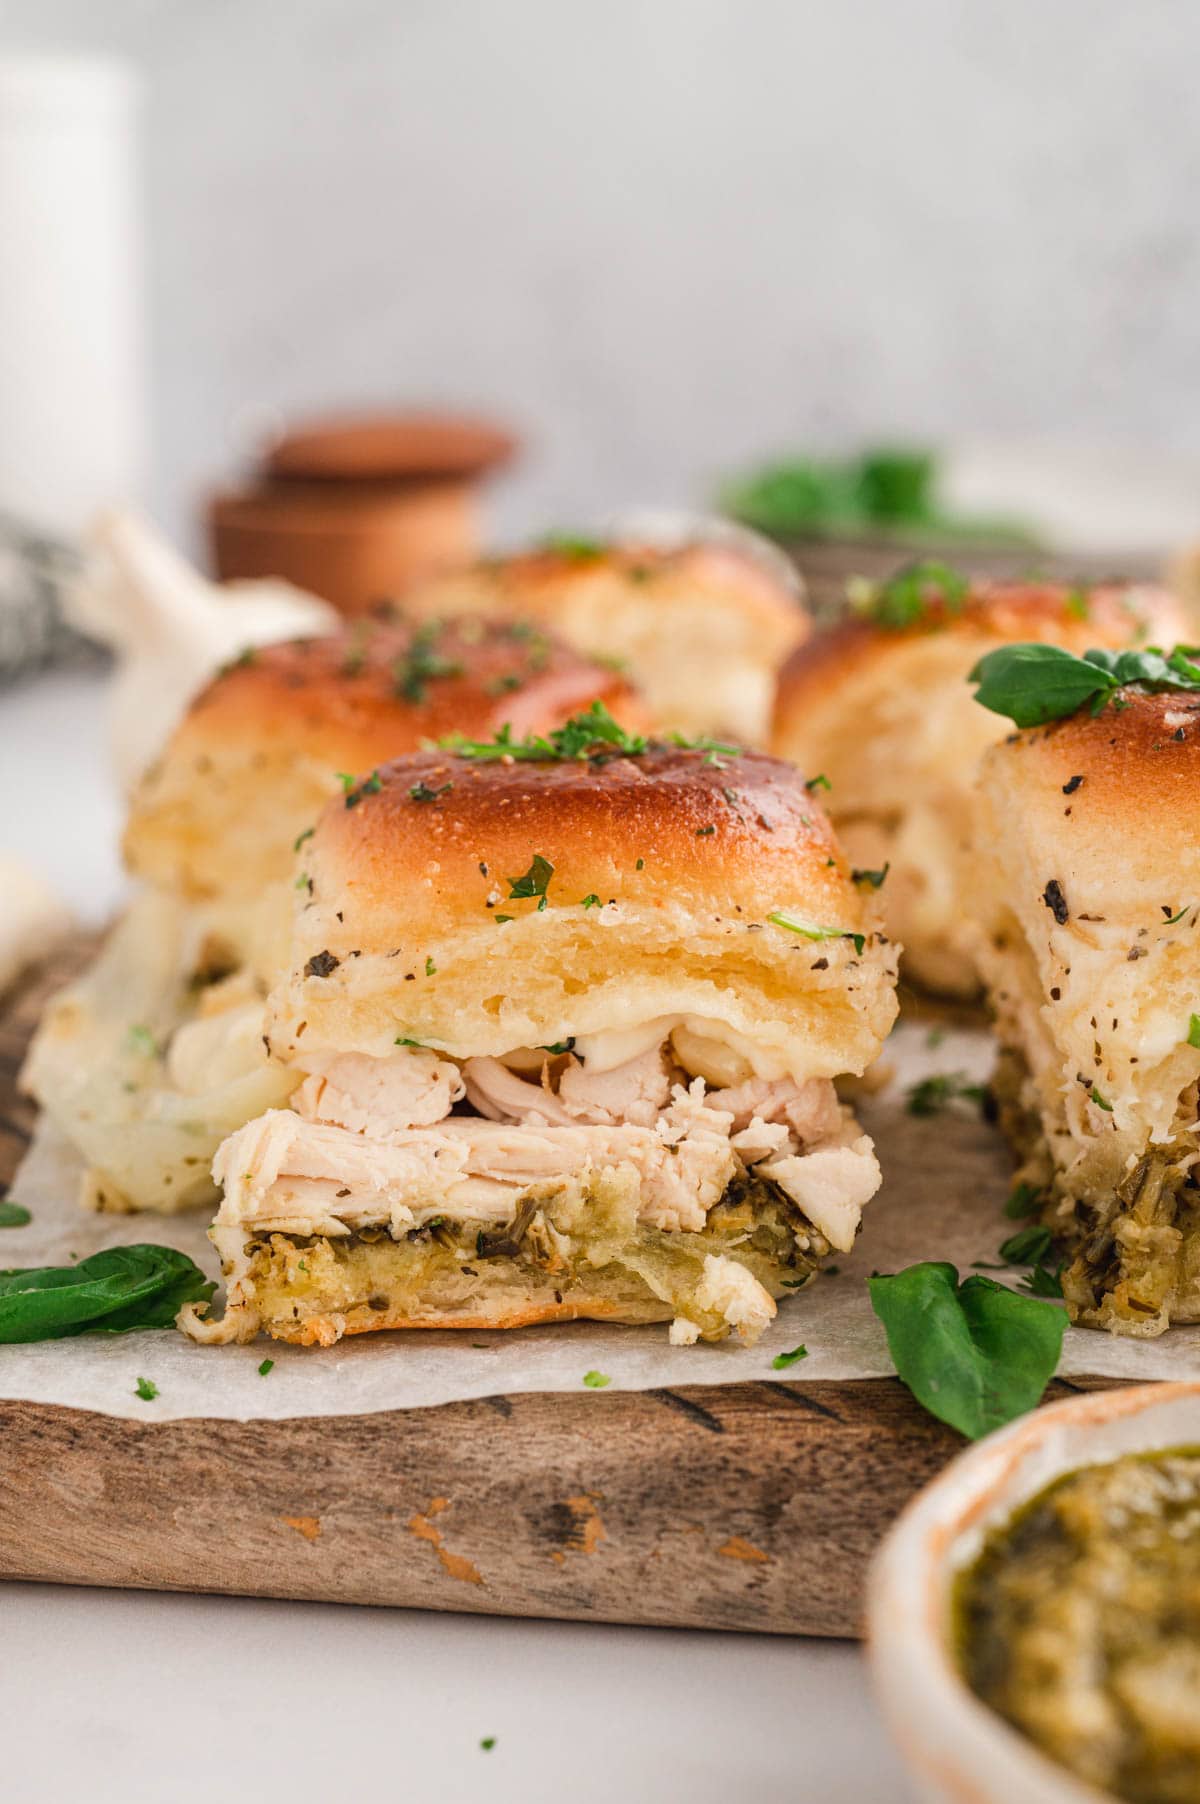 Chicken sliders, with pesto and melted mozzarella .